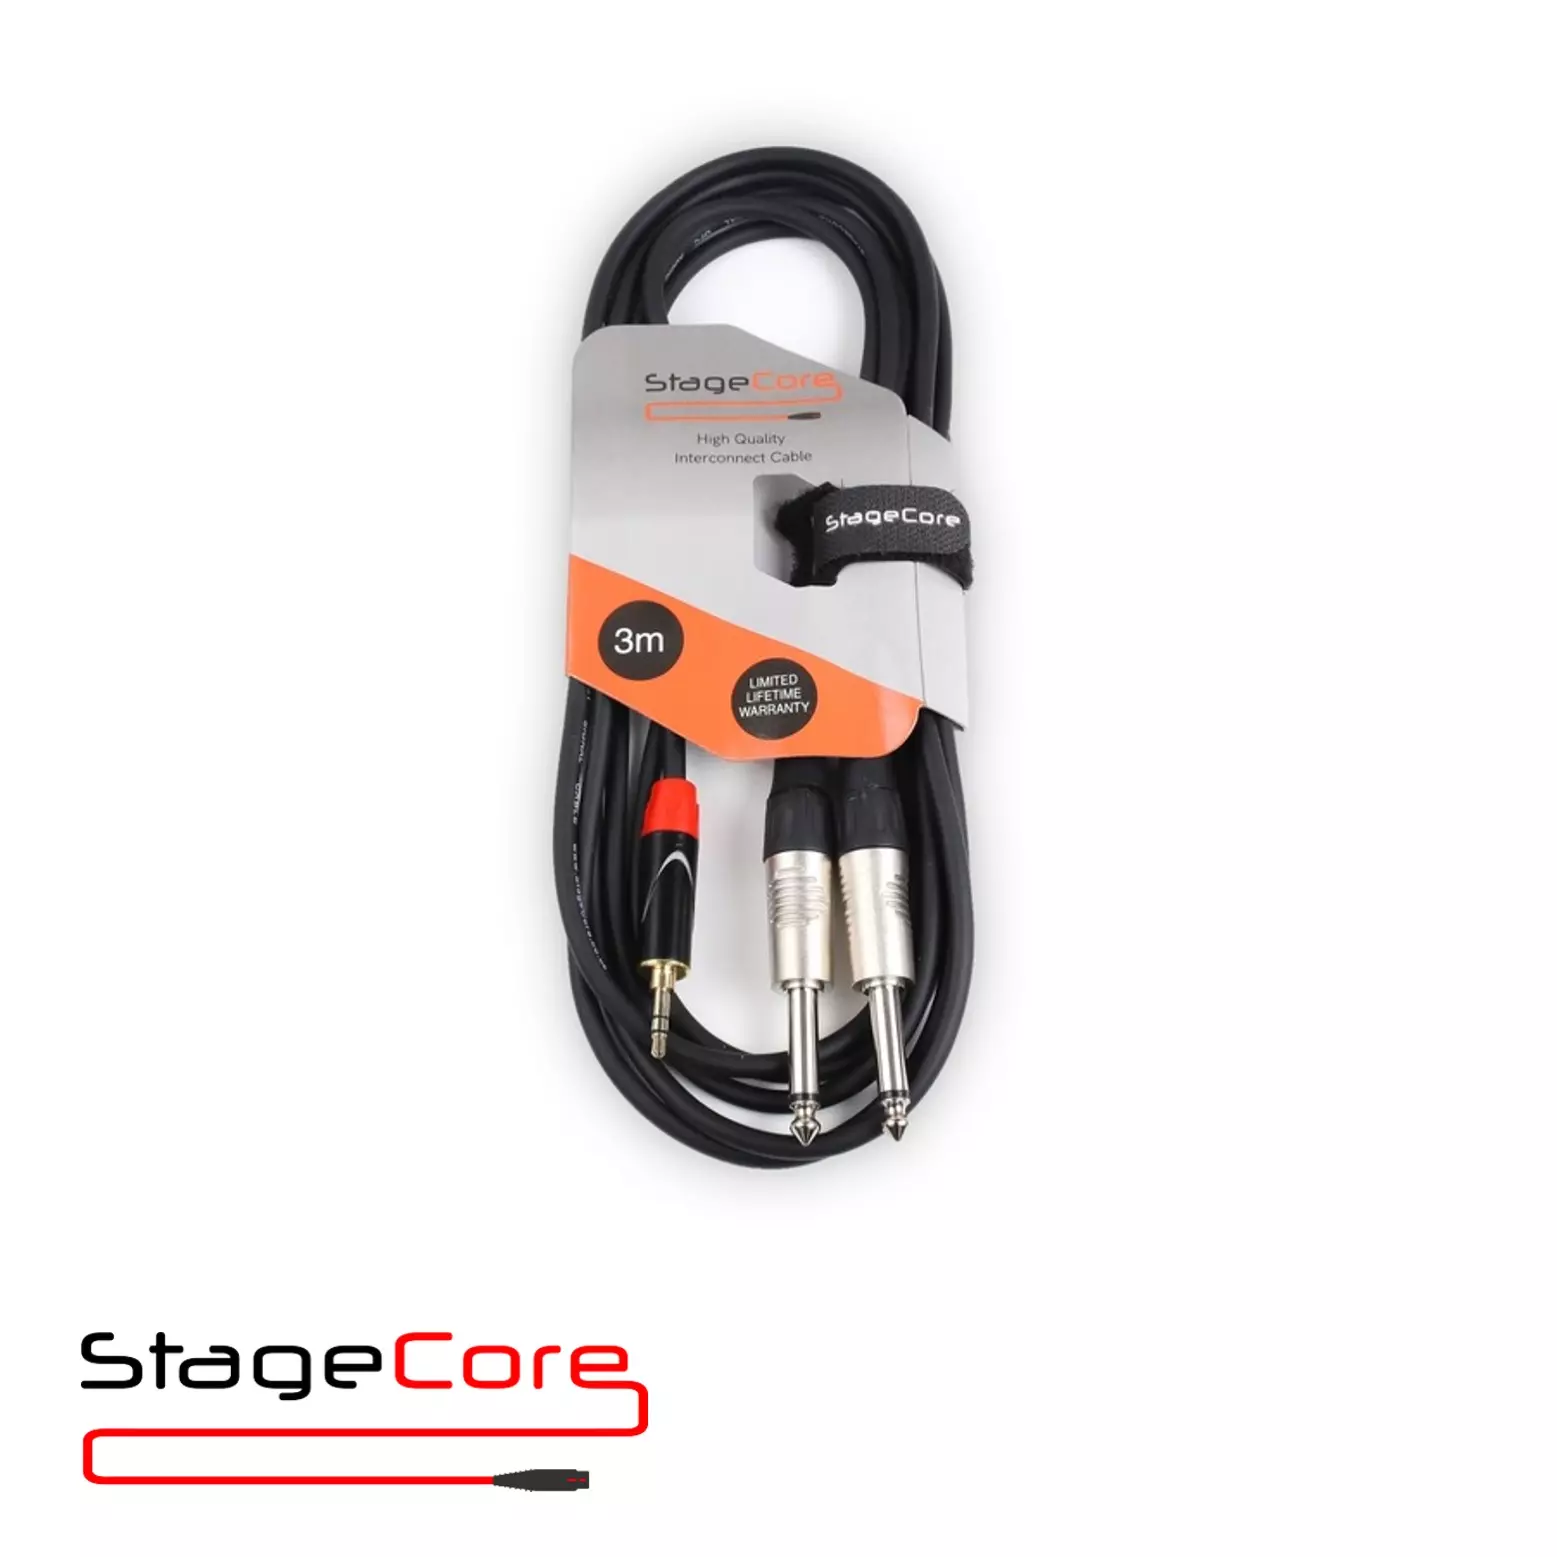 StageCore iCORE 170 Professional Audio Signal Cable - Includes Hook & Loop Tie